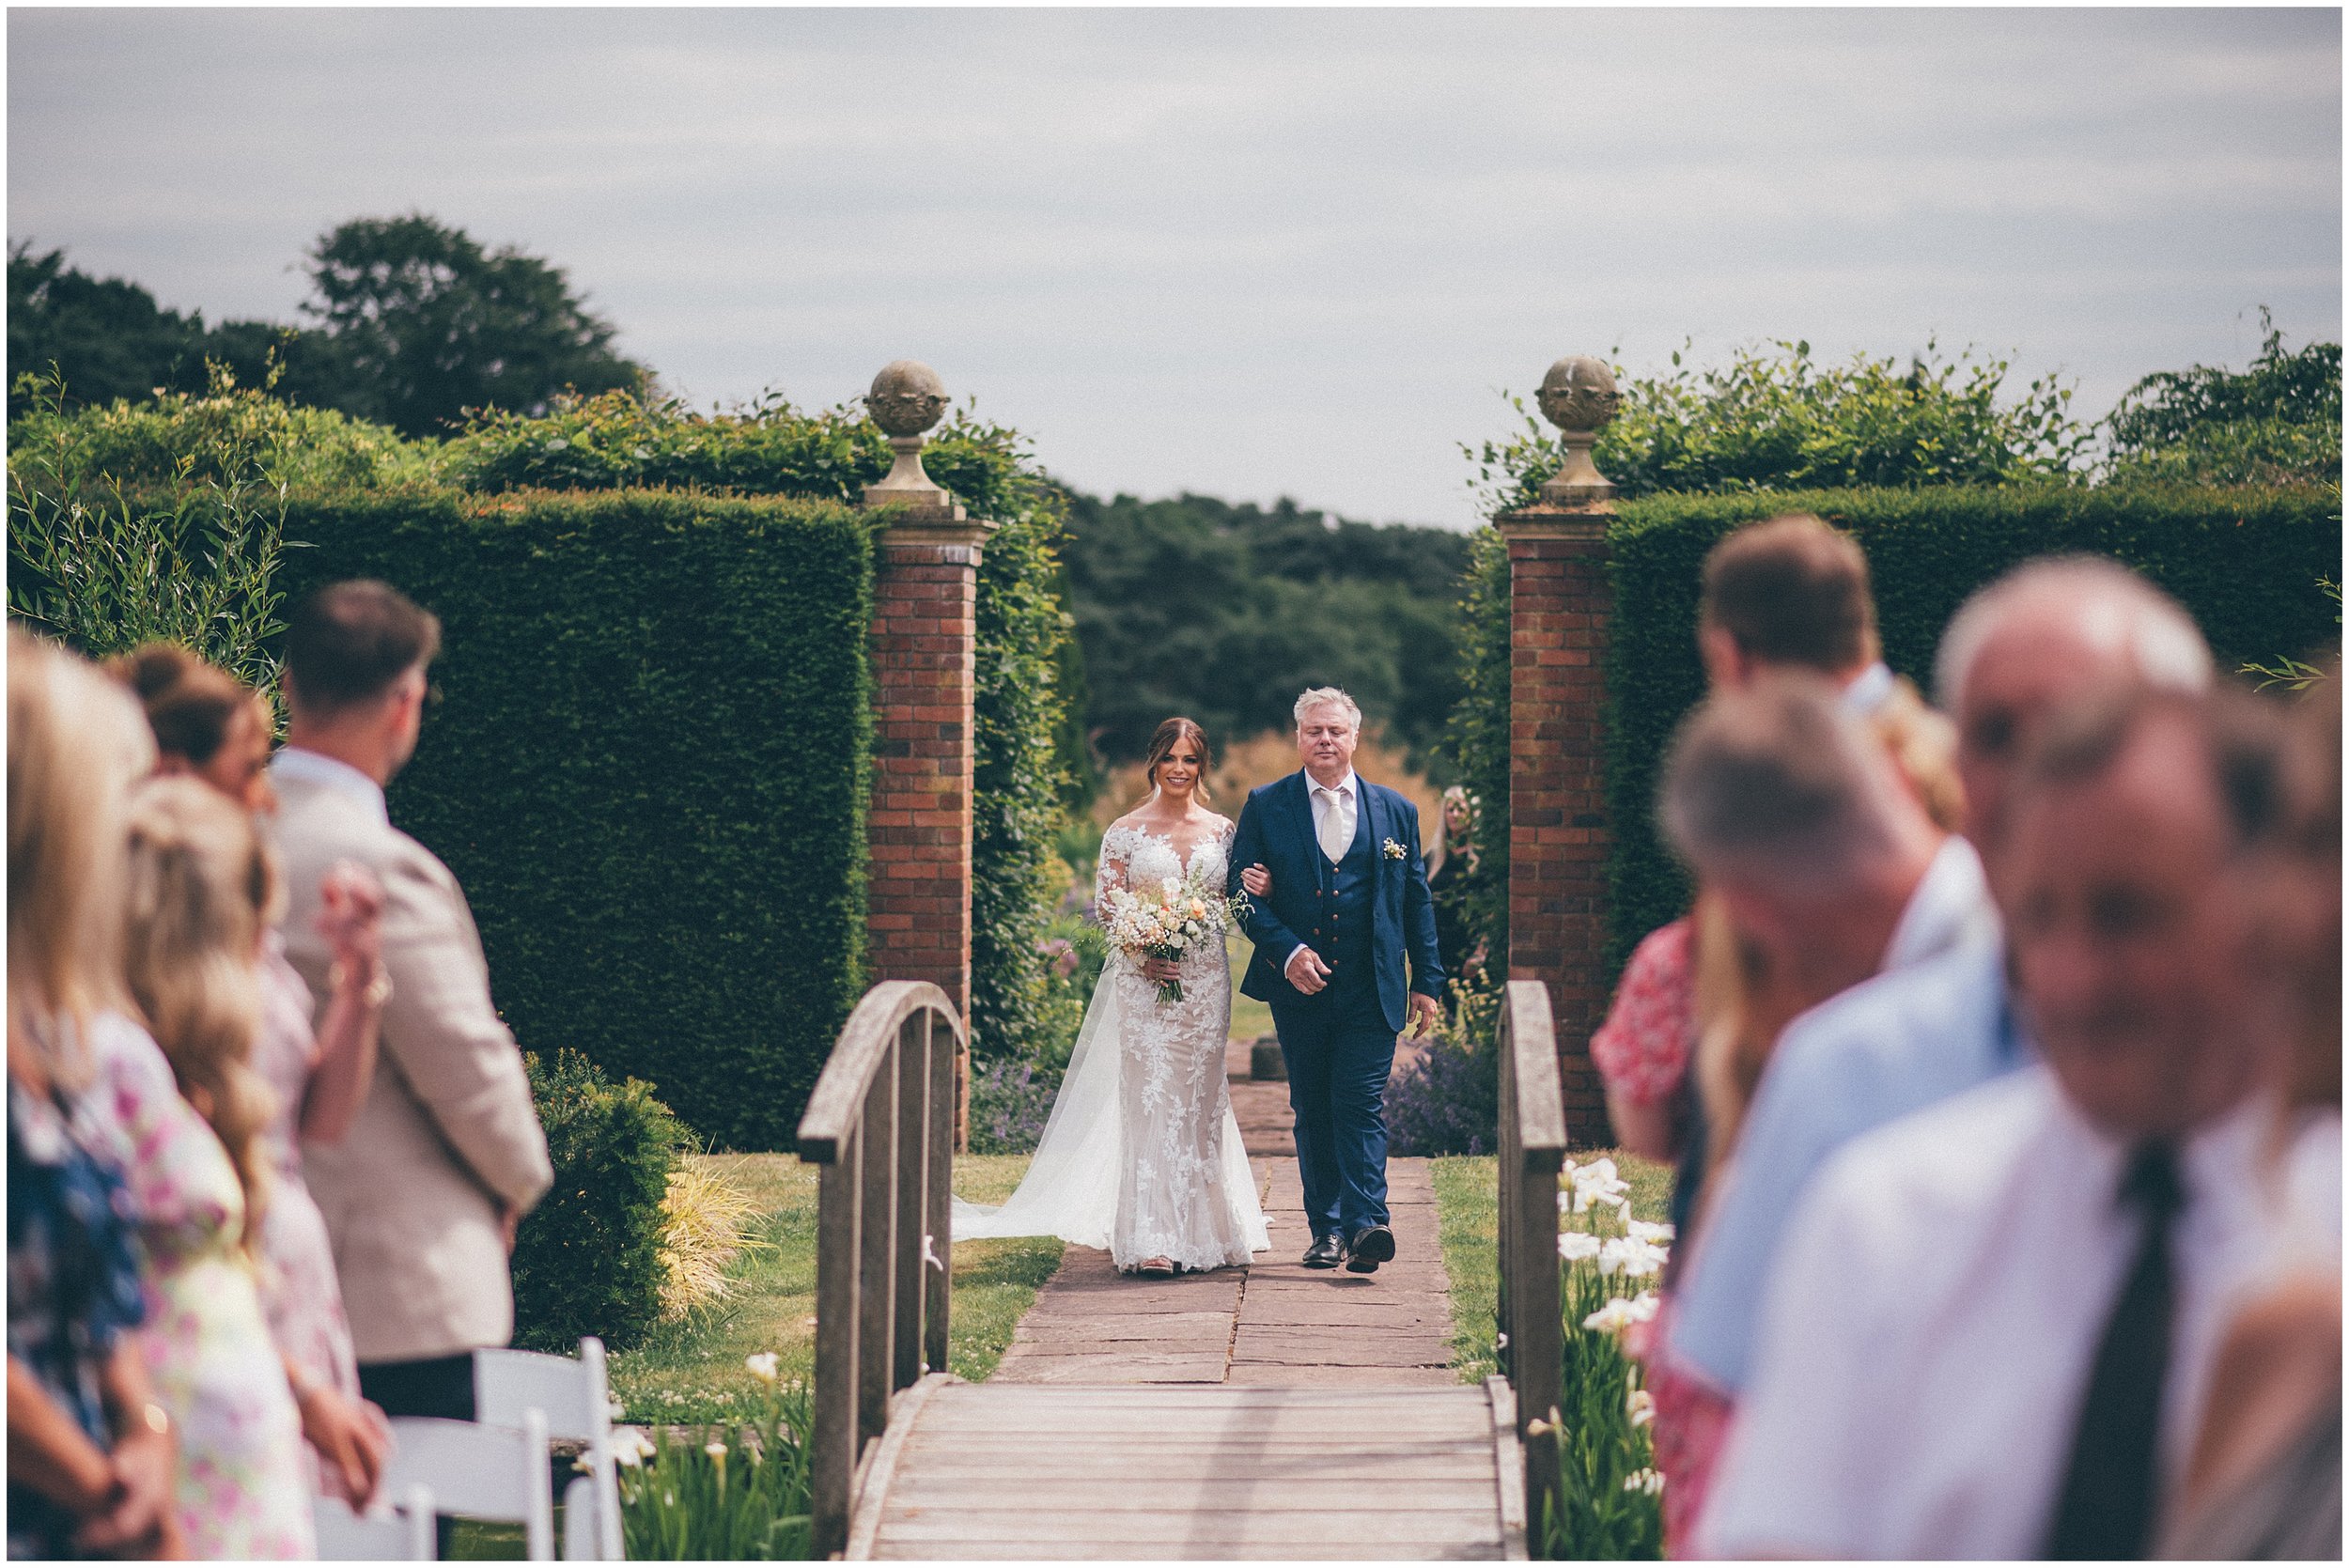 Helen Jane Smiddy North West wedding photographer photographs a Cheshire wedding at Abbeywood Estate in Delamere.